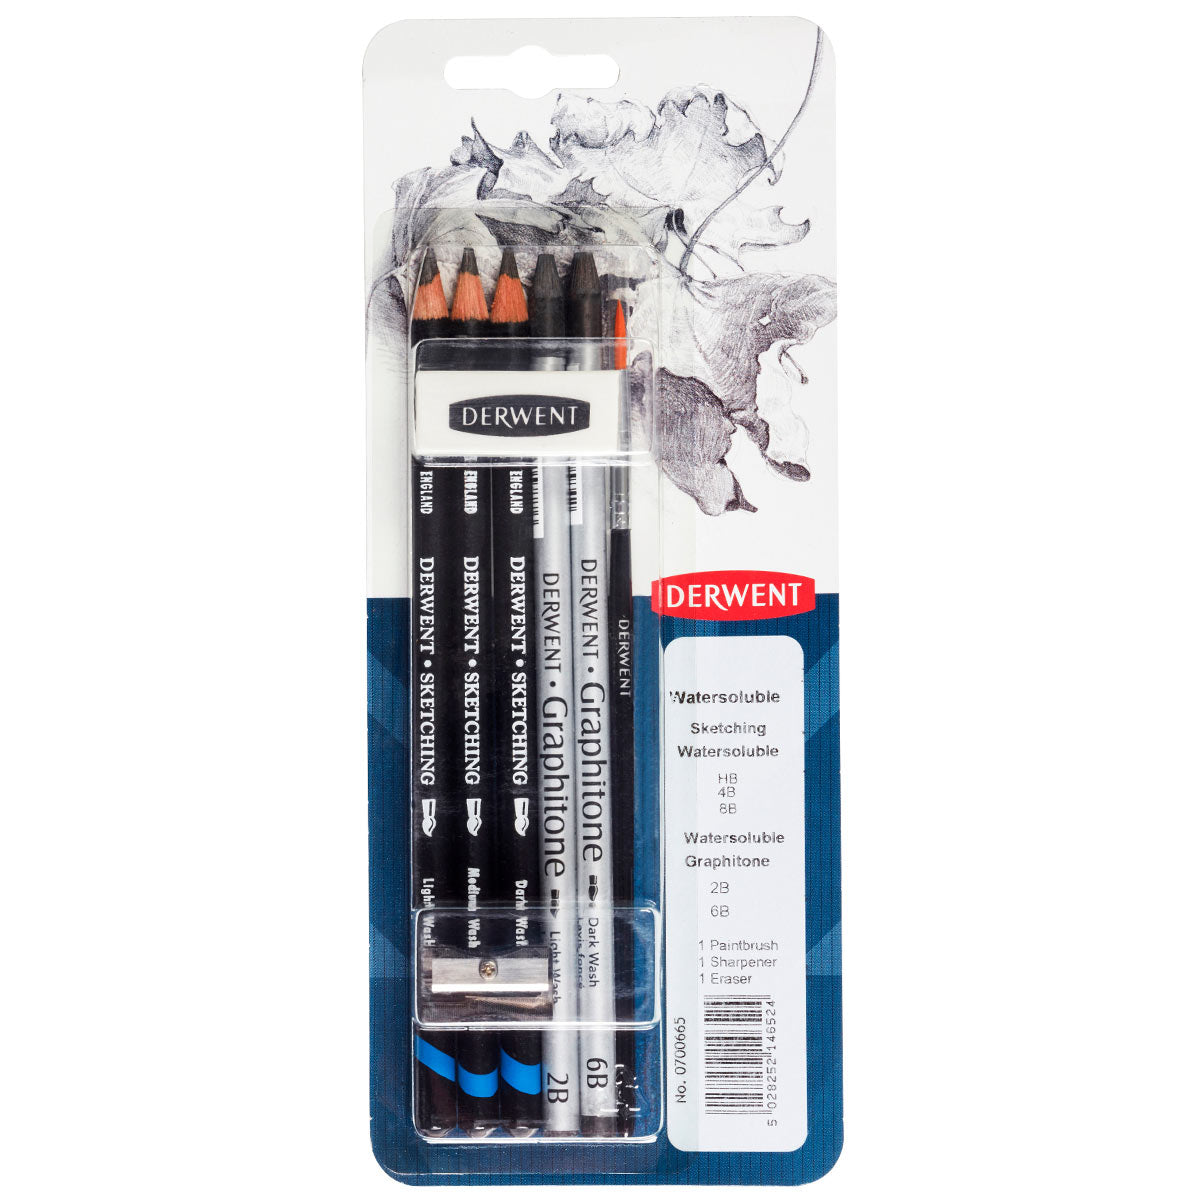 Derwent - Mixed Media Blister 8 Pack - Watersoluble Sketching Pencil